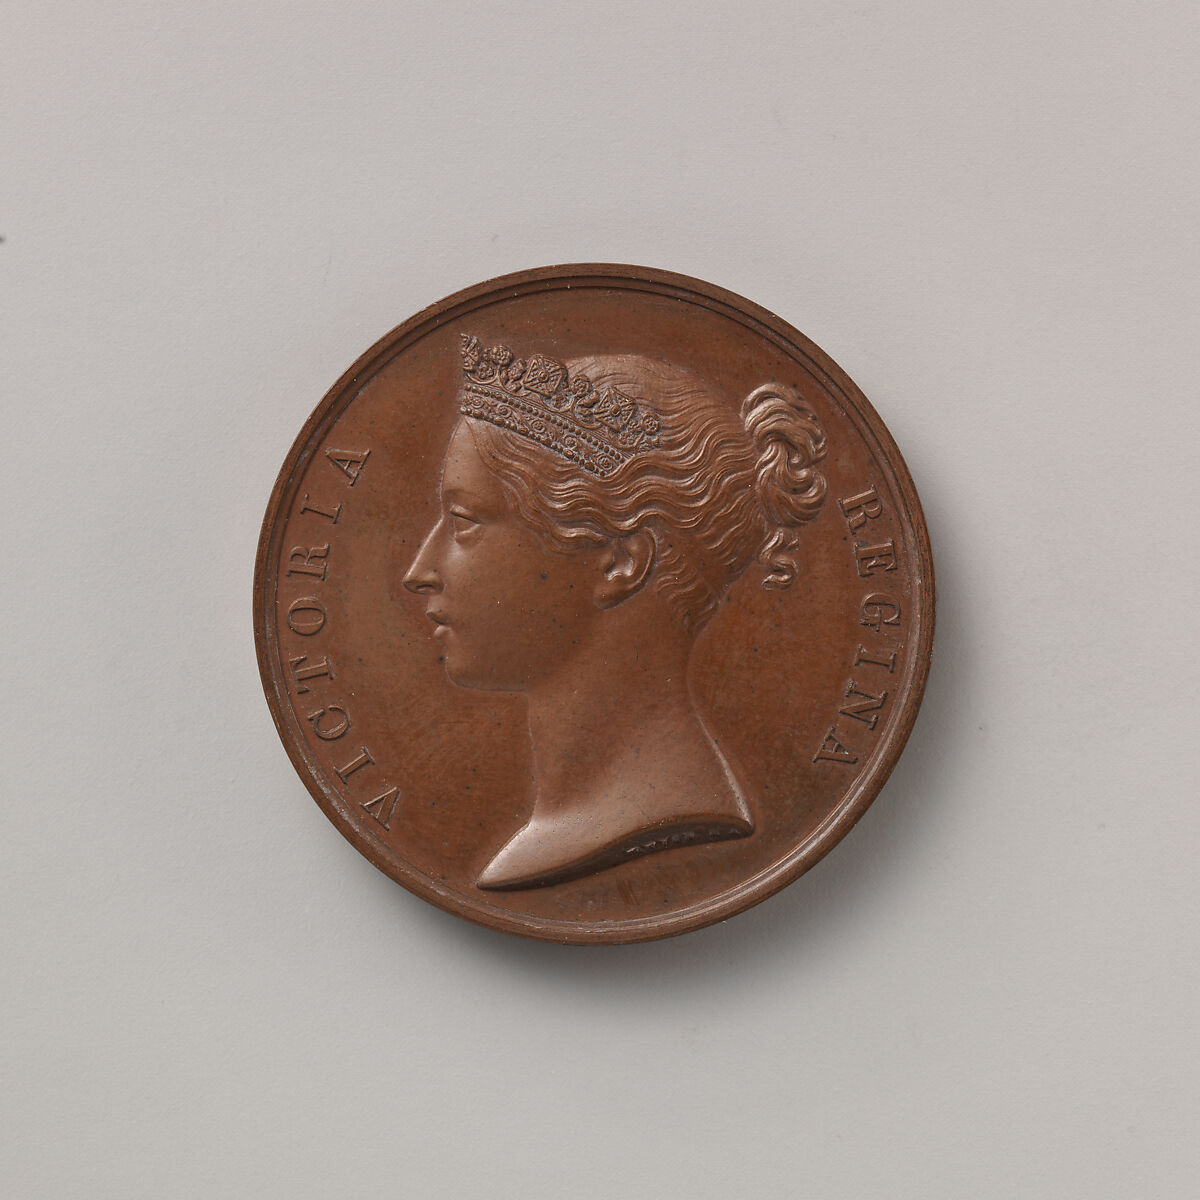 The South African Medal, Issued for the Campaigns of 1877–79, Medalist: William Wyon (British, Birmingham 1795–1851 Brighton), Bronze, British 